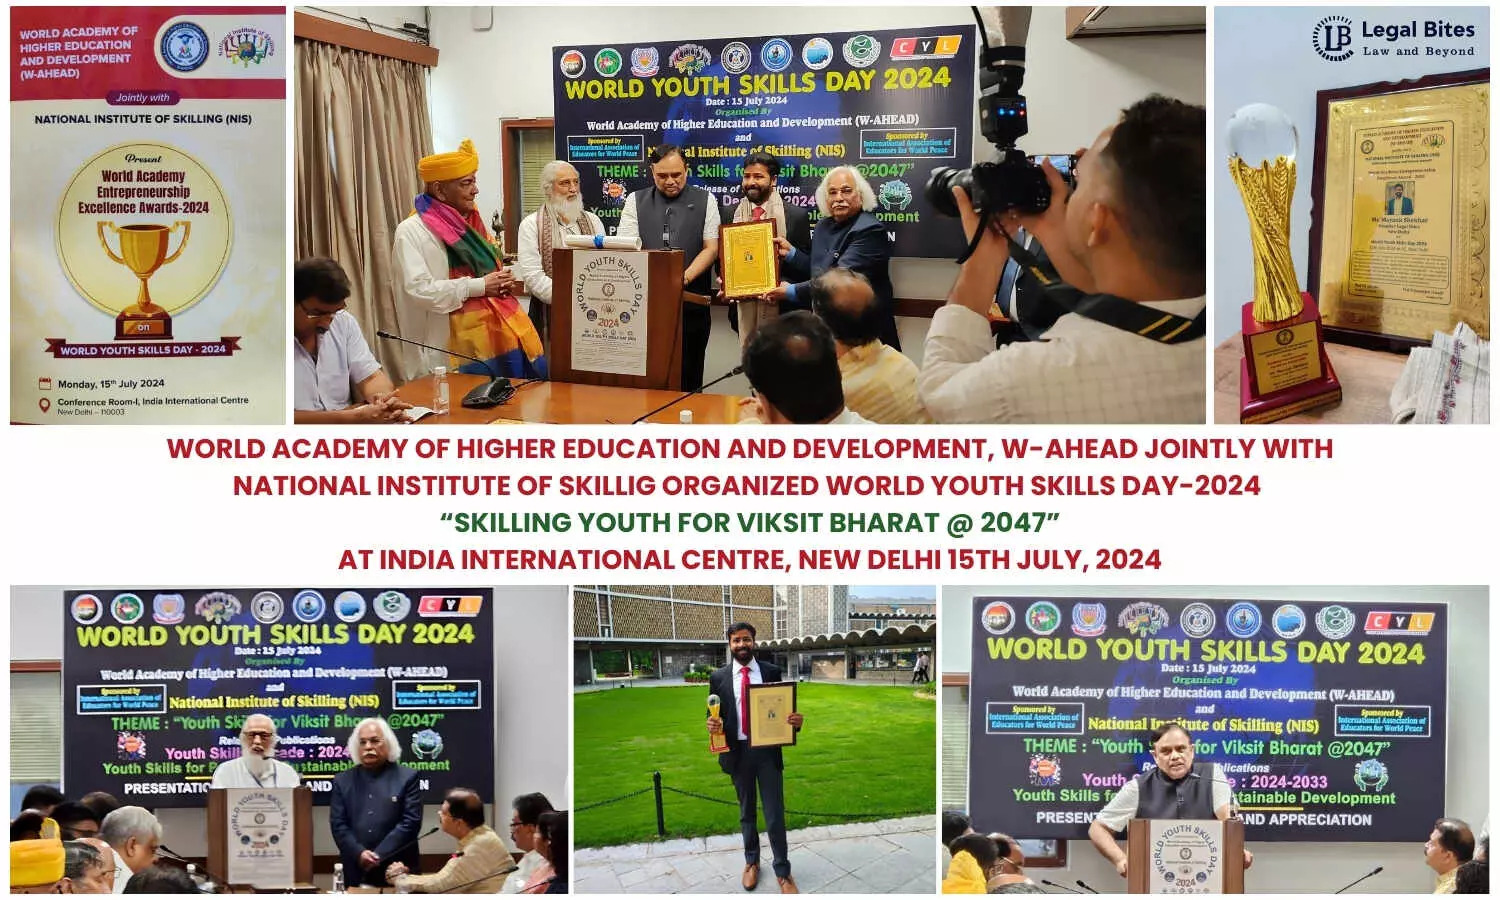 World Academy of Higher Education and Development with National Institute of Skilling Celebrating World Youth Skills Day 2024